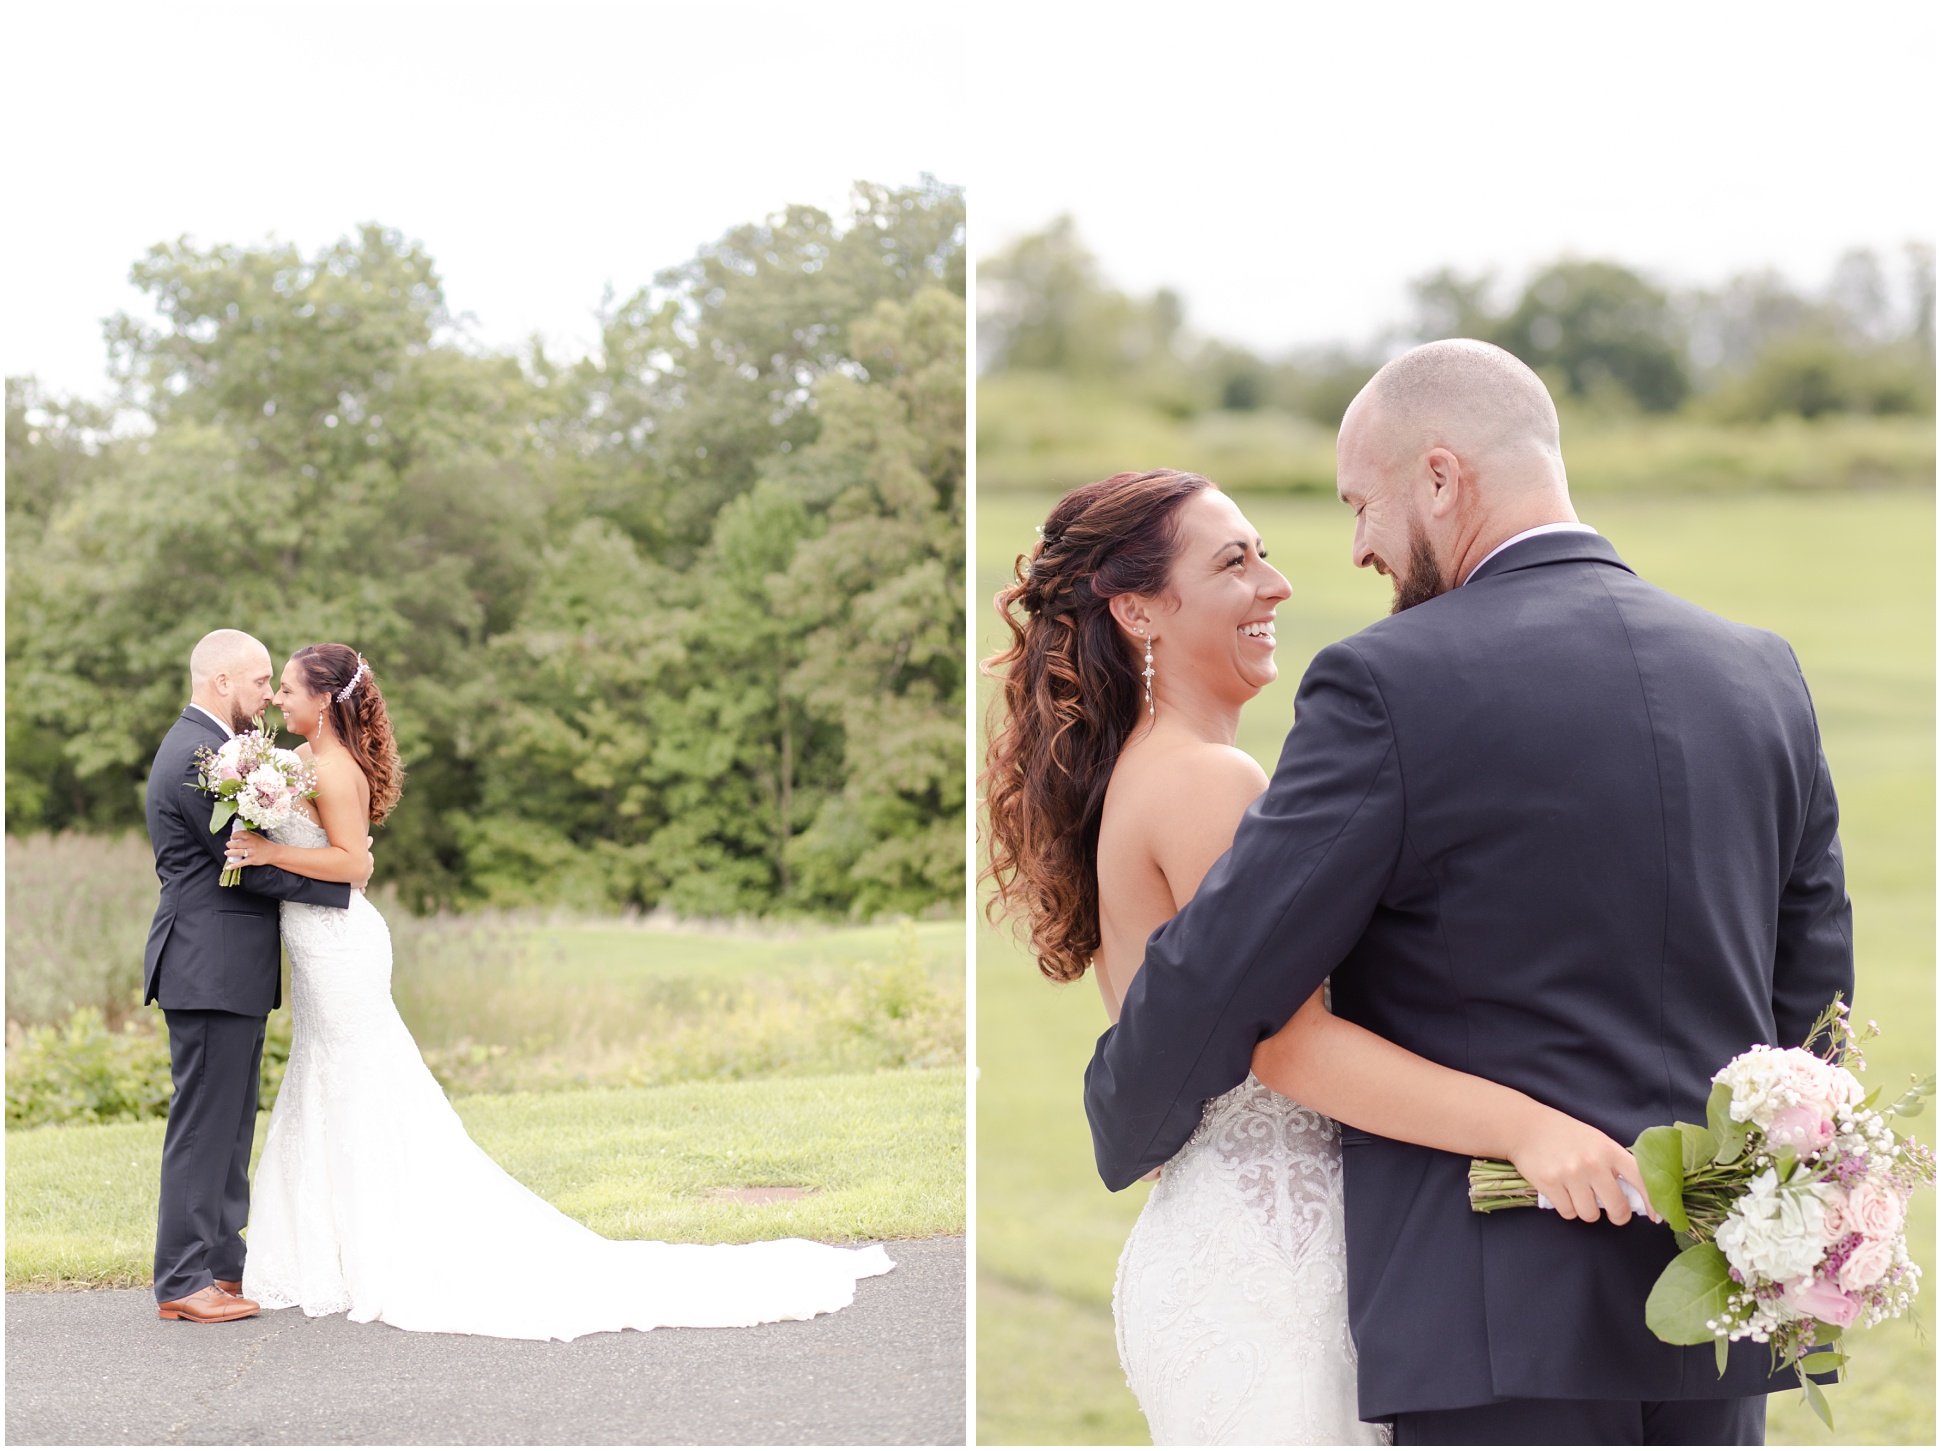 Two portraits of the bride and groom on the golf course at Mountain Branch